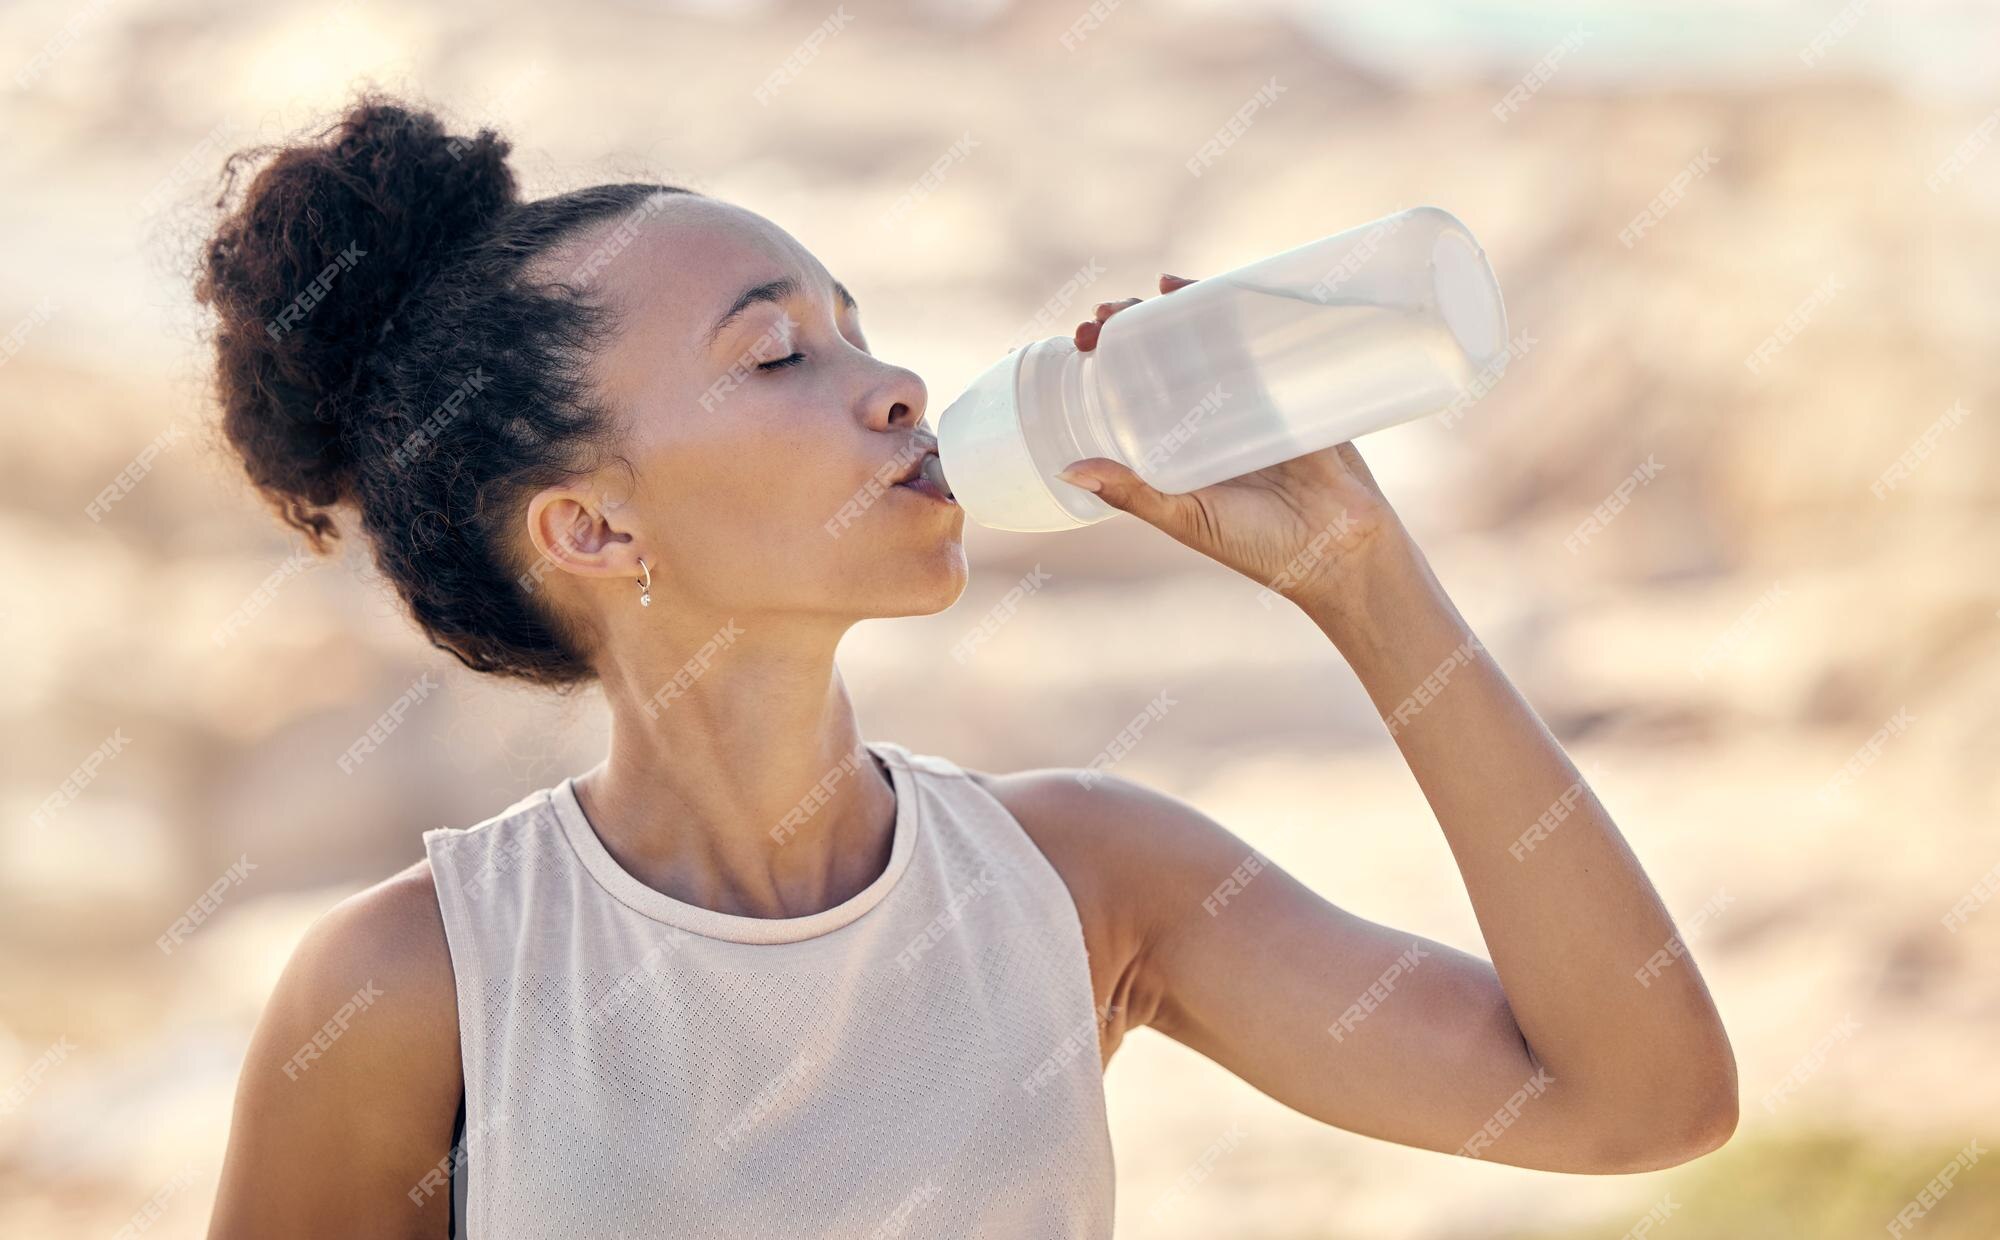 https://img.freepik.com/premium-photo/fitness-wellness-black-woman-drinking-water-after-exercise-training-workout-nature-park-outdoors-hydration-health-thirsty-female-athlete-drink-from-water-bottle-after-running_590464-102154.jpg?w=2000